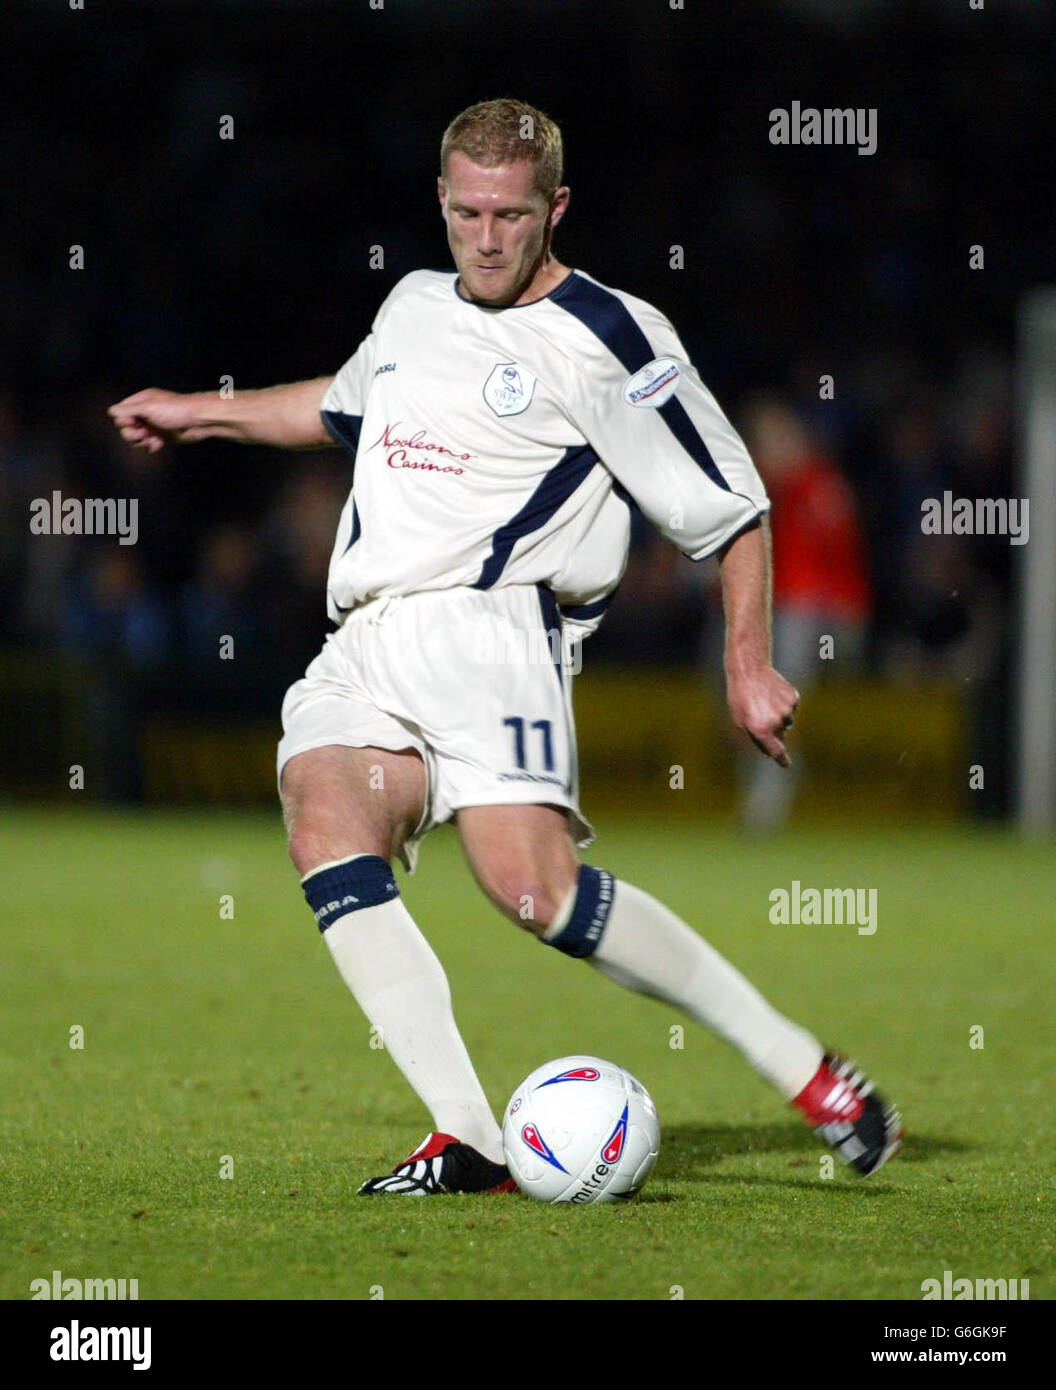 Sheffield Wednesday's Paul Smith in action during their Nationwide Division Two match against Wycombe Wanderers at Adams Park, Wycombe. NO UNOFFICIAL CLUB WEBSITE USE. Stock Photo